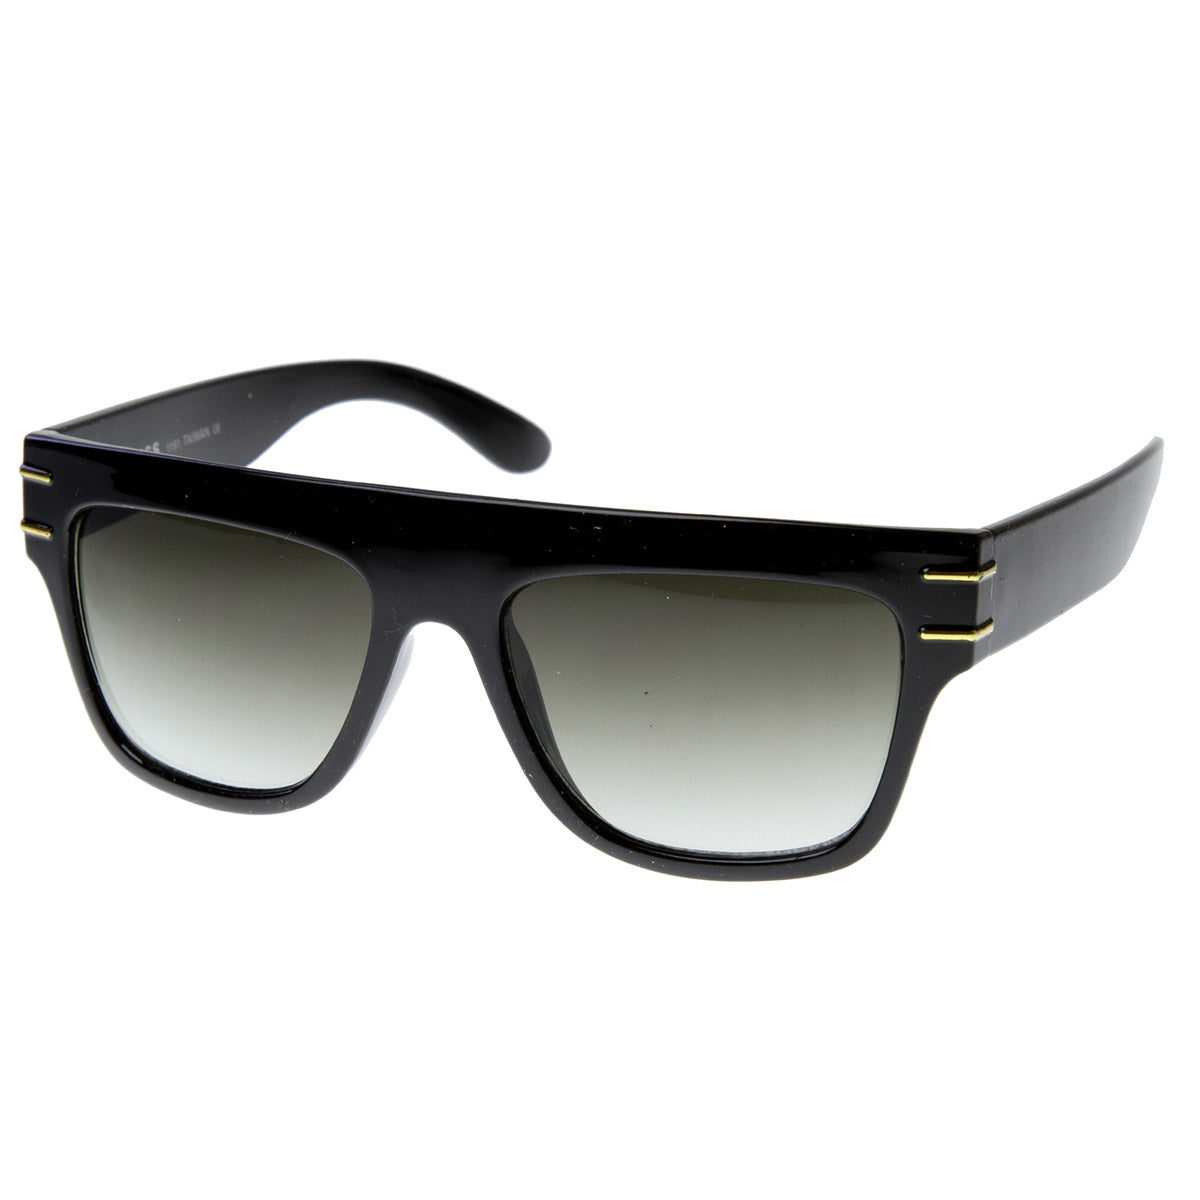 Vintage Inspired Flat Top Mod Sunglasses with Temple Details - sunglass.la